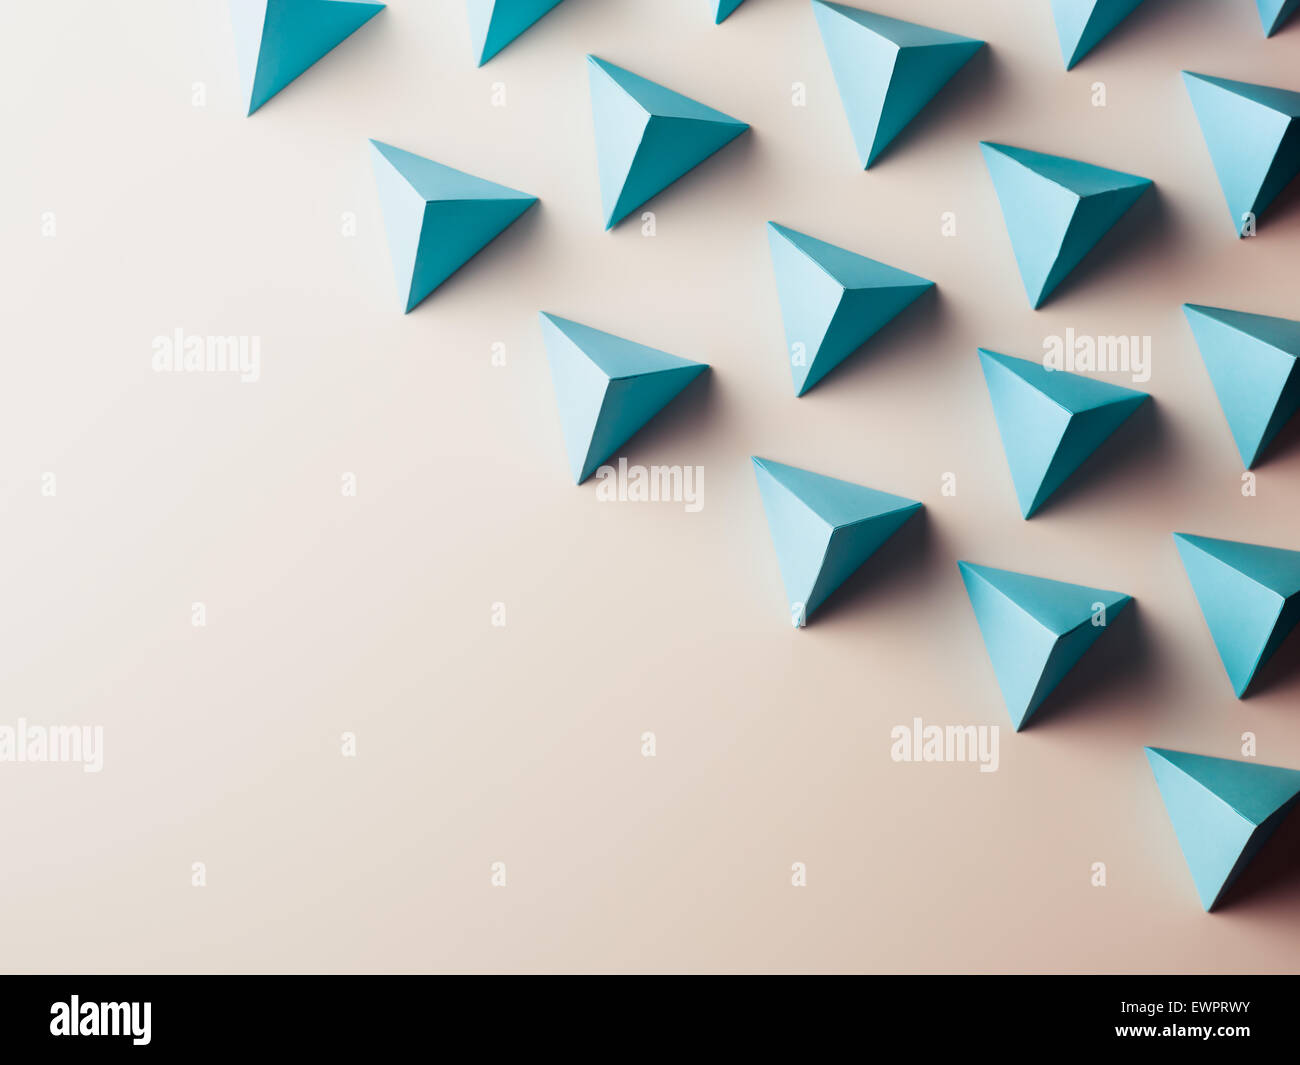 abstract background consisting of paper geometric shapes. copy space available Stock Photo